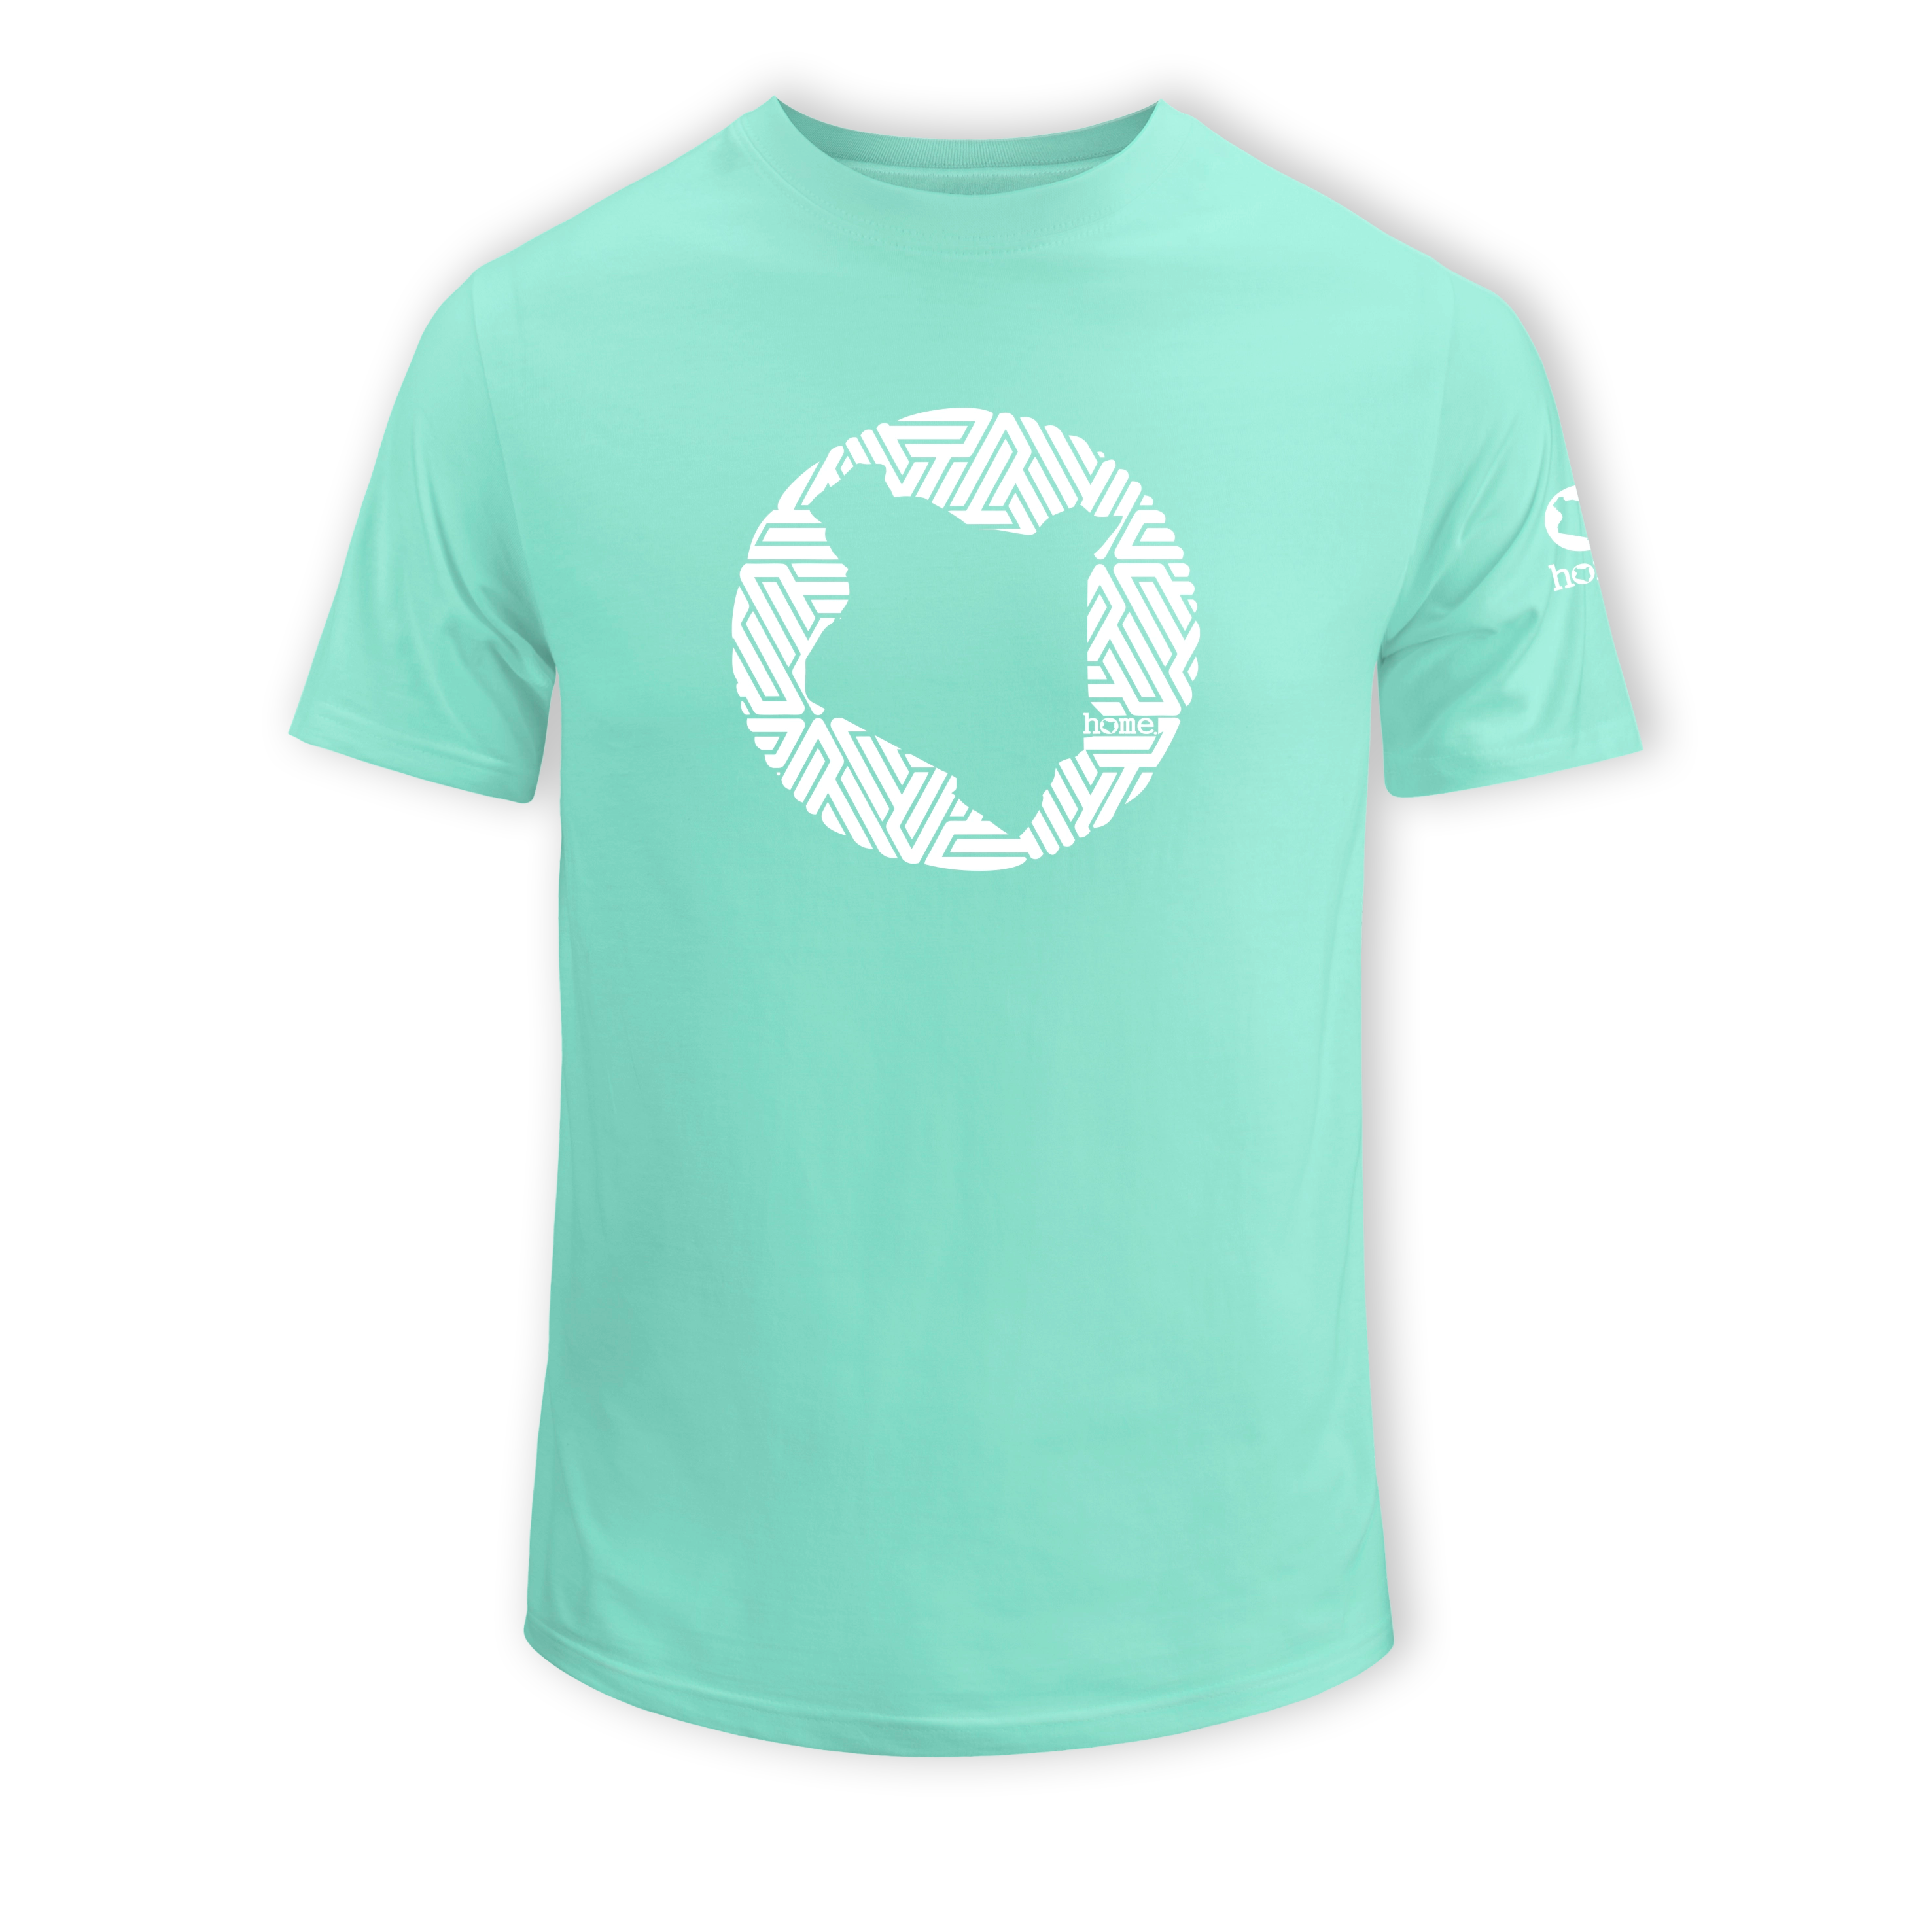 home_254 SHORT-SLEEVED TURQUOISE GREEN T-SHIRT WITH A WHITE MAP PRINT – COTTON PLUS FABRIC